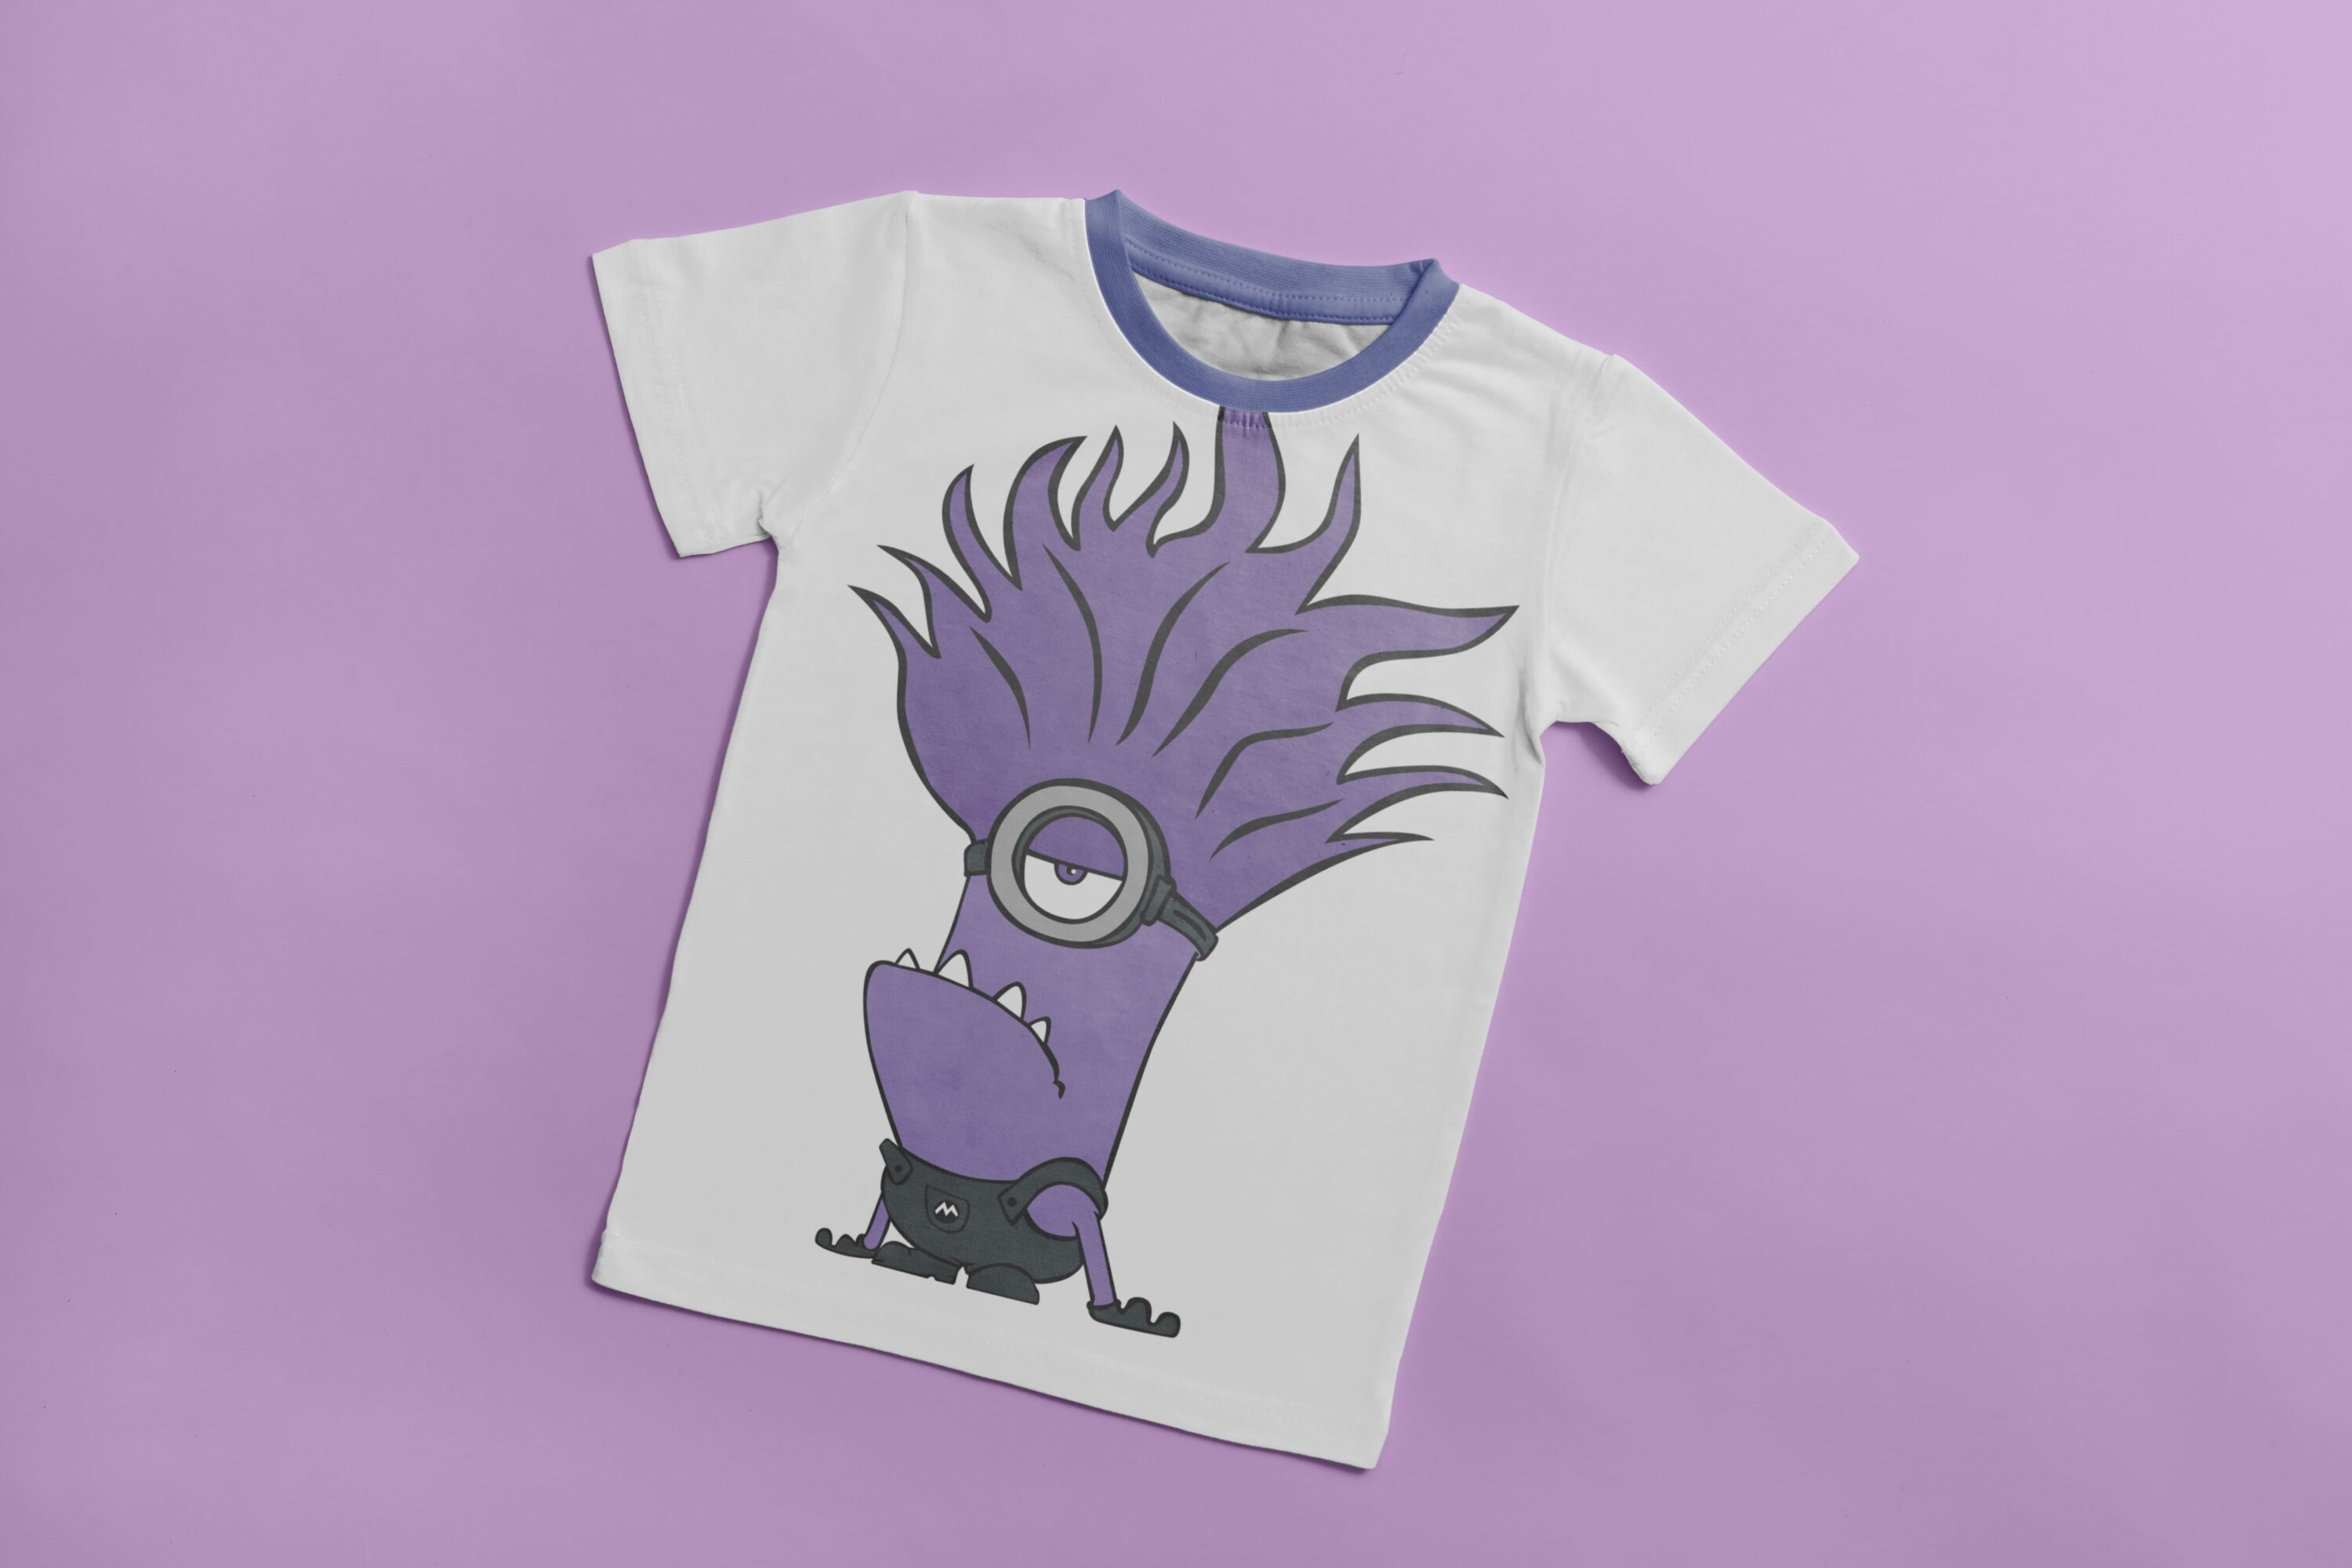 White T-shirt with a purple collar and an image offended character Evil Minion.